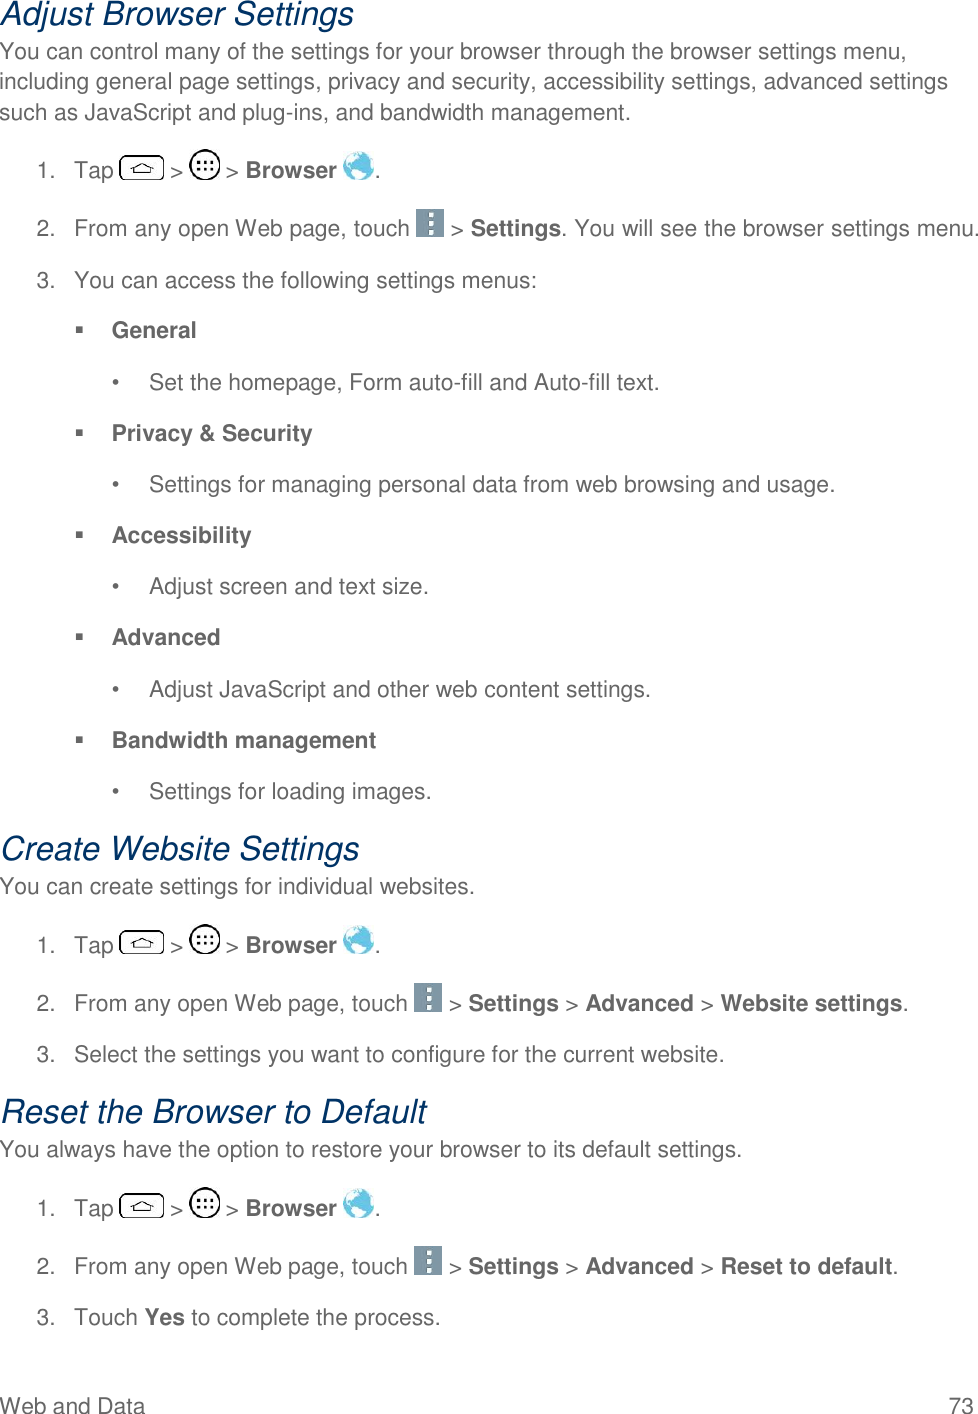 Web and Data  73 Adjust Browser Settings You can control many of the settings for your browser through the browser settings menu, including general page settings, privacy and security, accessibility settings, advanced settings such as JavaScript and plug-ins, and bandwidth management. 1.  Tap   &gt;   &gt; Browser  . 2.  From any open Web page, touch   &gt; Settings. You will see the browser settings menu. 3.  You can access the following settings menus:  General  •  Set the homepage, Form auto-fill and Auto-fill text.   Privacy &amp; Security  •  Settings for managing personal data from web browsing and usage.   Accessibility  •  Adjust screen and text size.  Advanced  •  Adjust JavaScript and other web content settings.   Bandwidth management  •  Settings for loading images.  Create Website Settings You can create settings for individual websites. 1.  Tap   &gt;   &gt; Browser  . 2.  From any open Web page, touch   &gt; Settings &gt; Advanced &gt; Website settings. 3.  Select the settings you want to configure for the current website. Reset the Browser to Default You always have the option to restore your browser to its default settings. 1.  Tap   &gt;   &gt; Browser  . 2.  From any open Web page, touch   &gt; Settings &gt; Advanced &gt; Reset to default. 3.  Touch Yes to complete the process.  